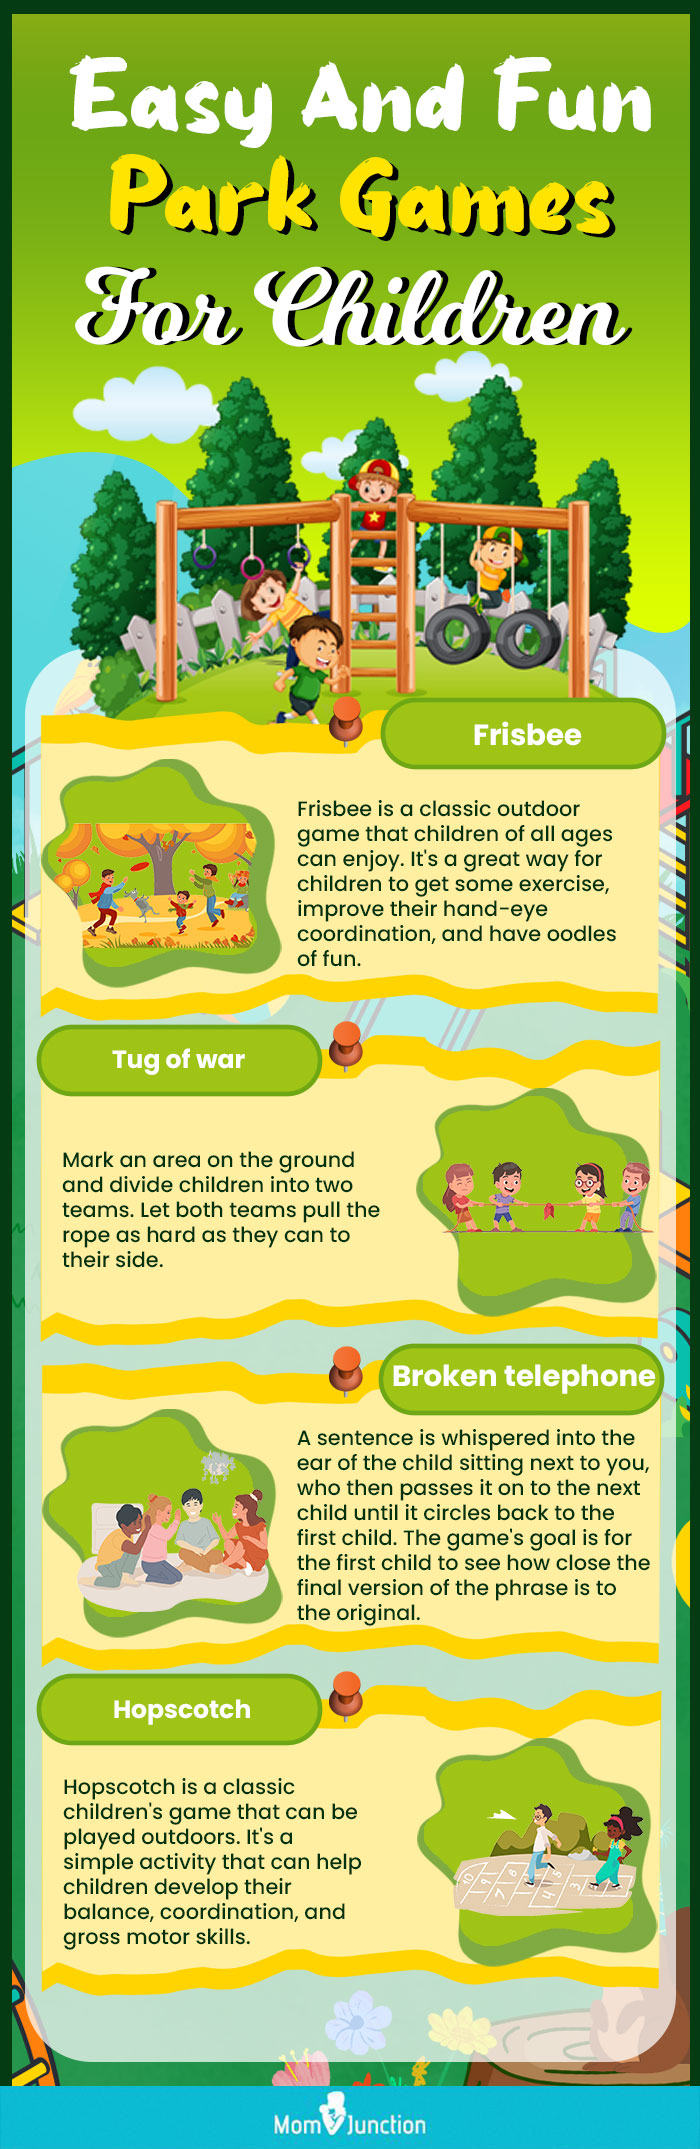 13 Fun Games and Park Activities